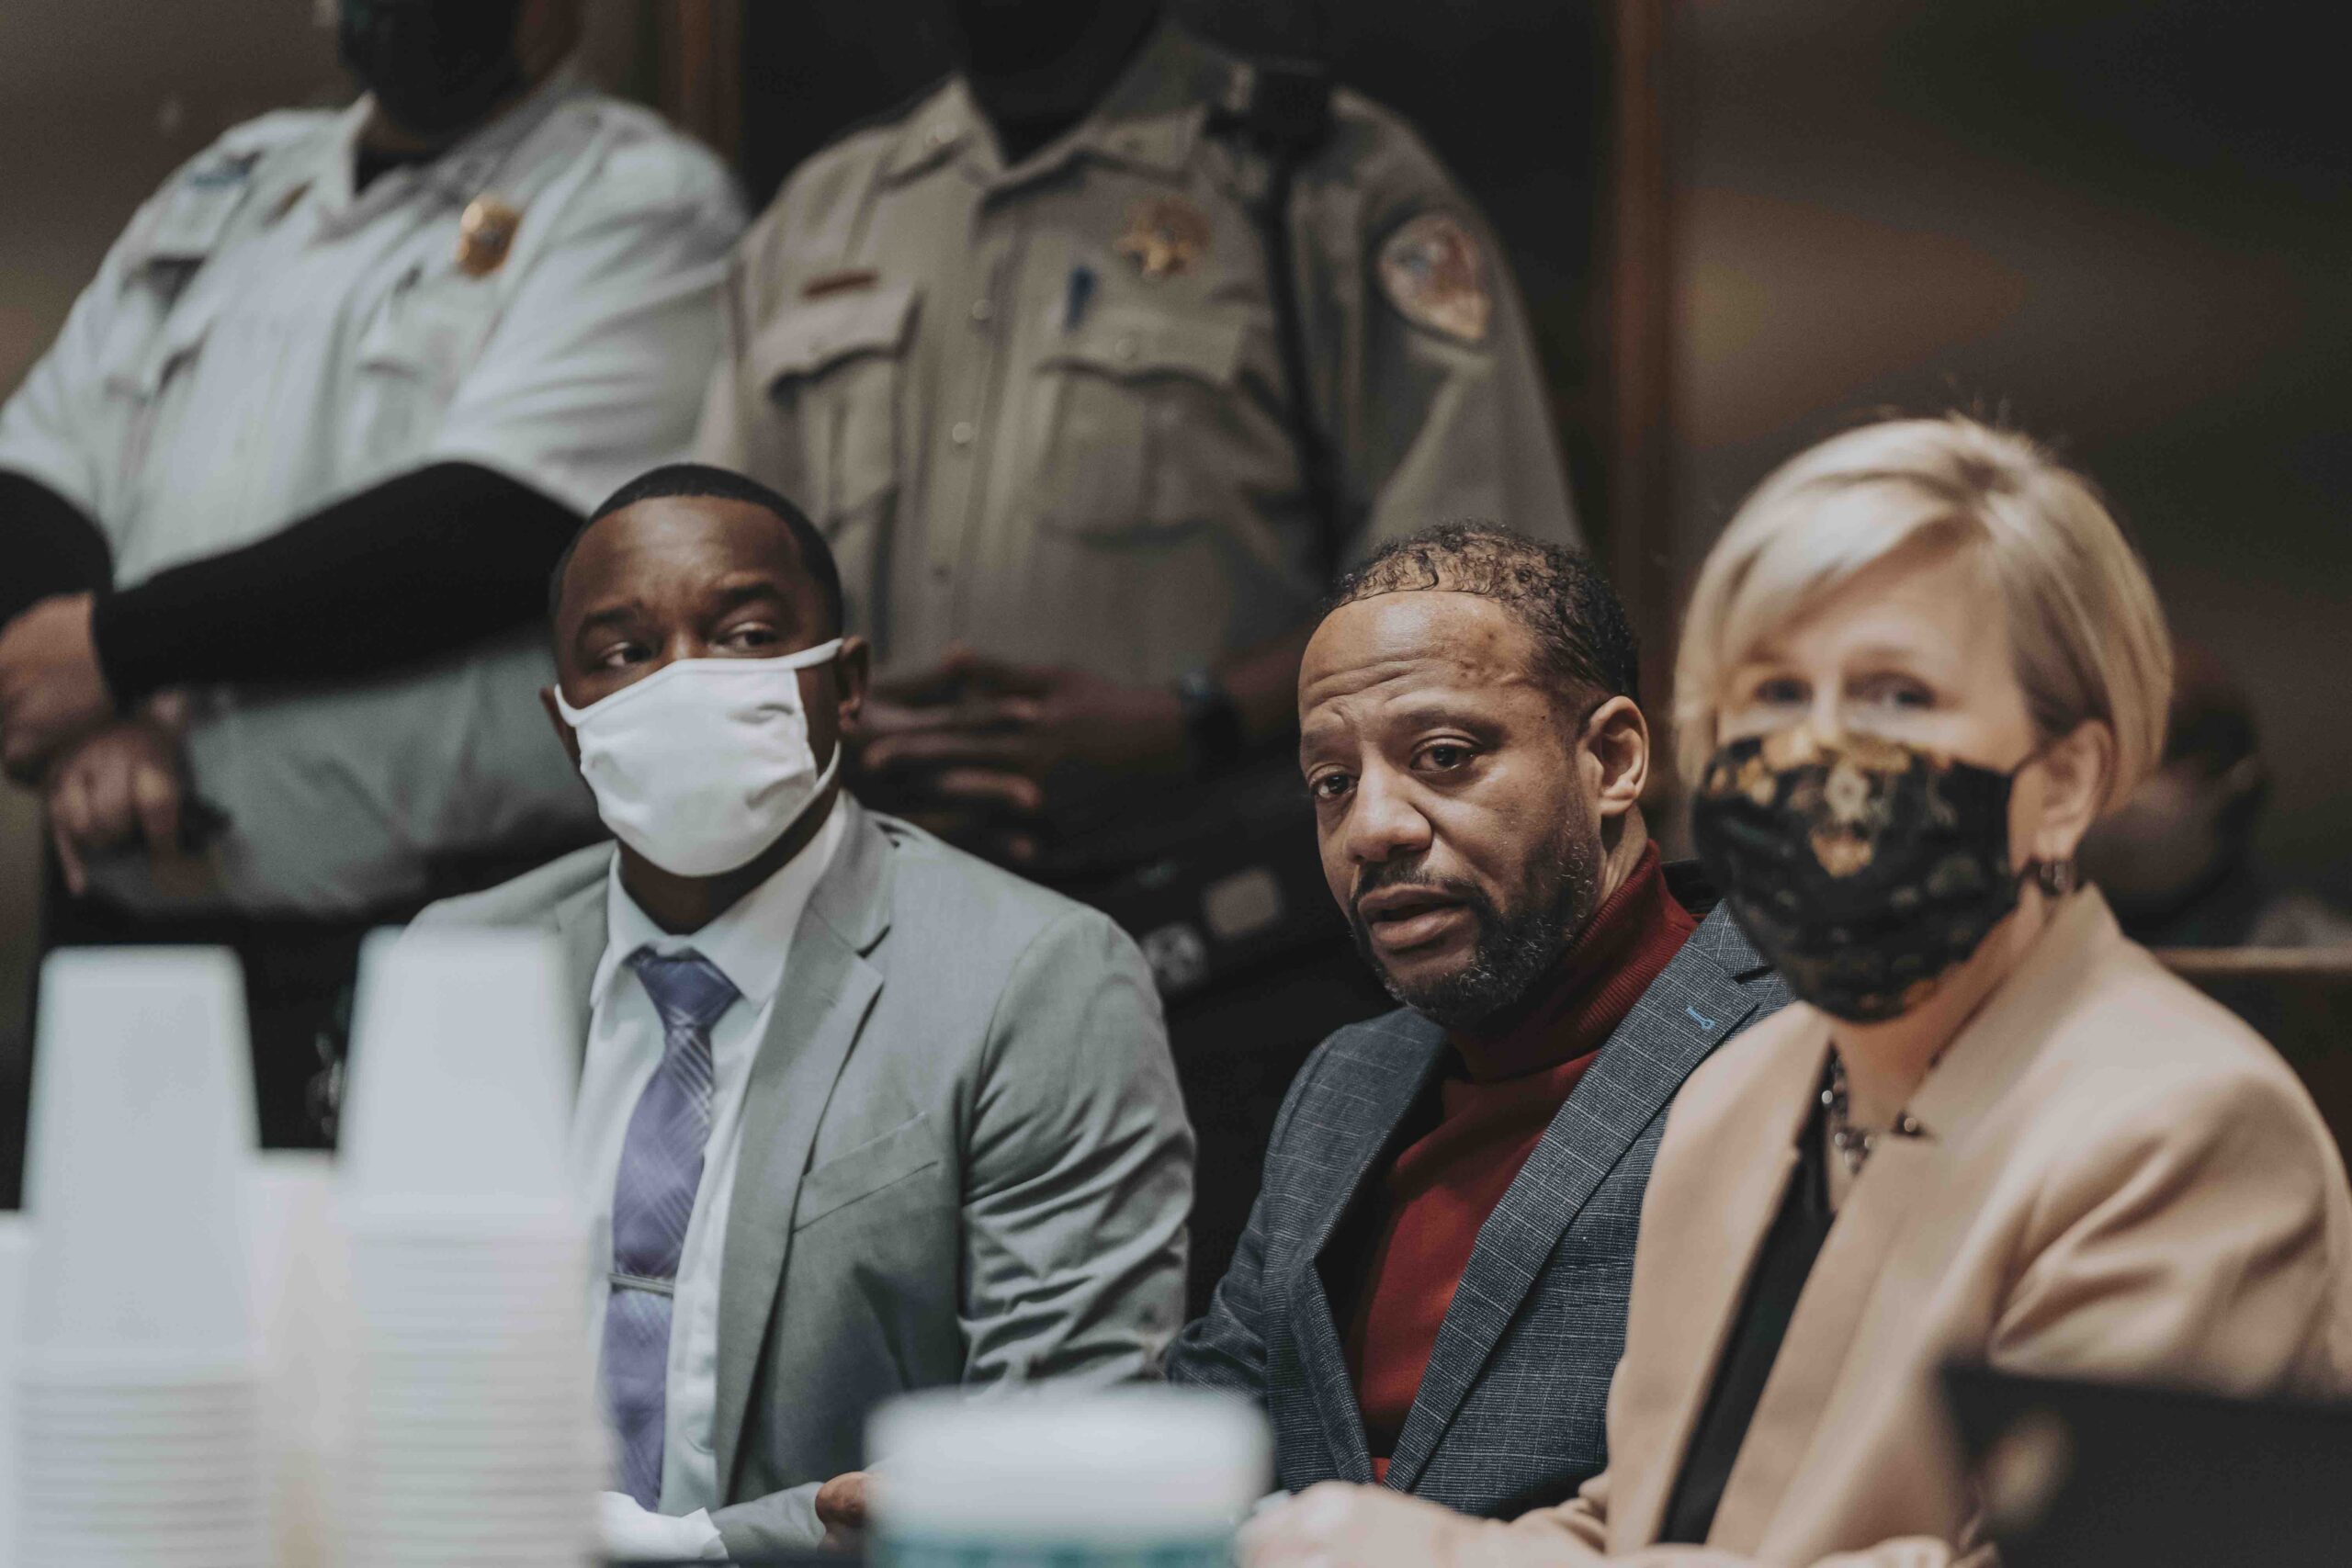 Pervis Payne, middle, with his attorneys David Fletcher and Kelley Henry of the Federal Defender on Nov. 23, 2021 (Image: Laramie Renae/Innocence Project) 